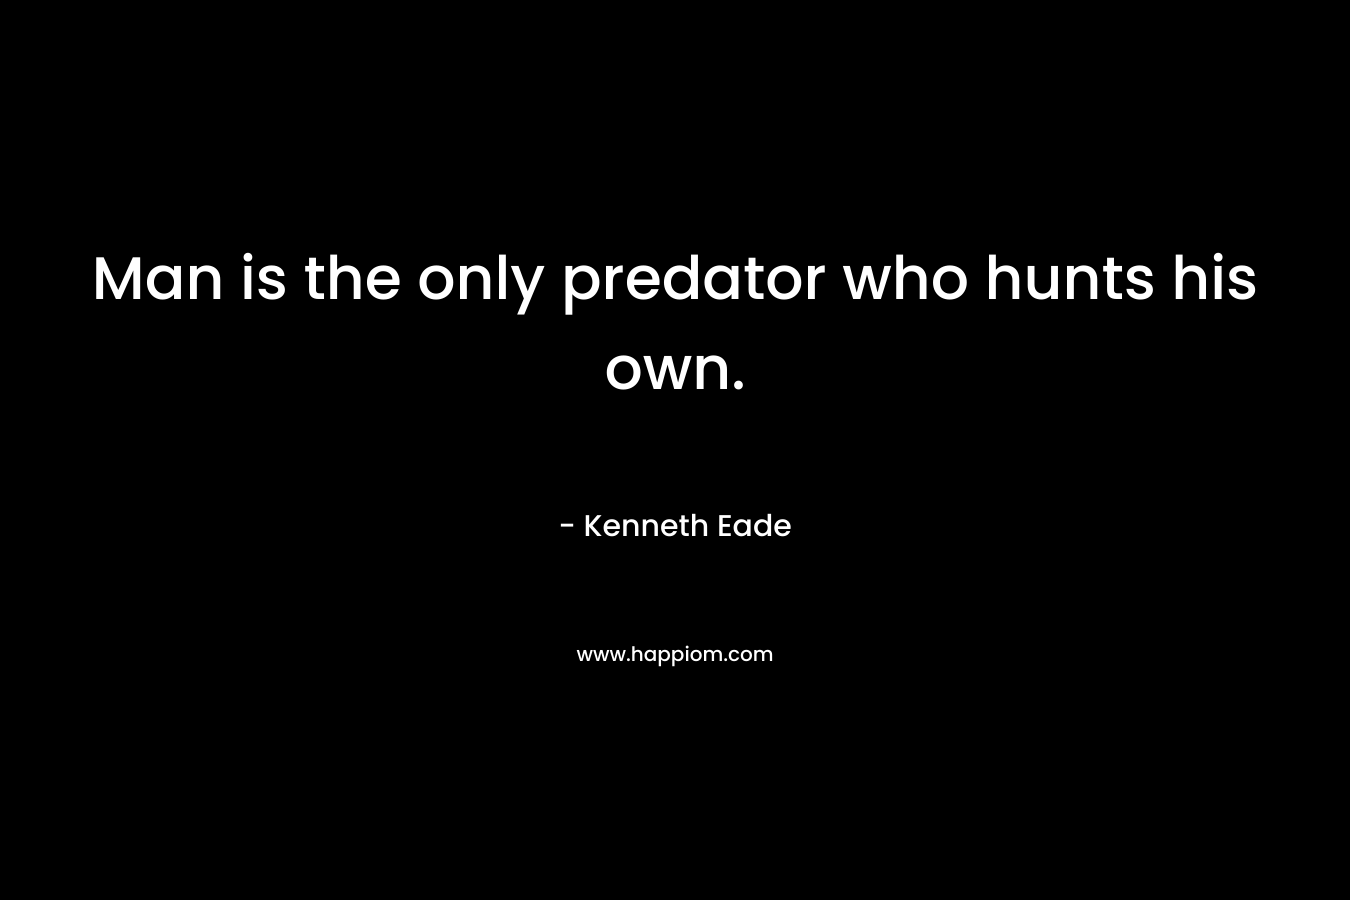 Man is the only predator who hunts his own.